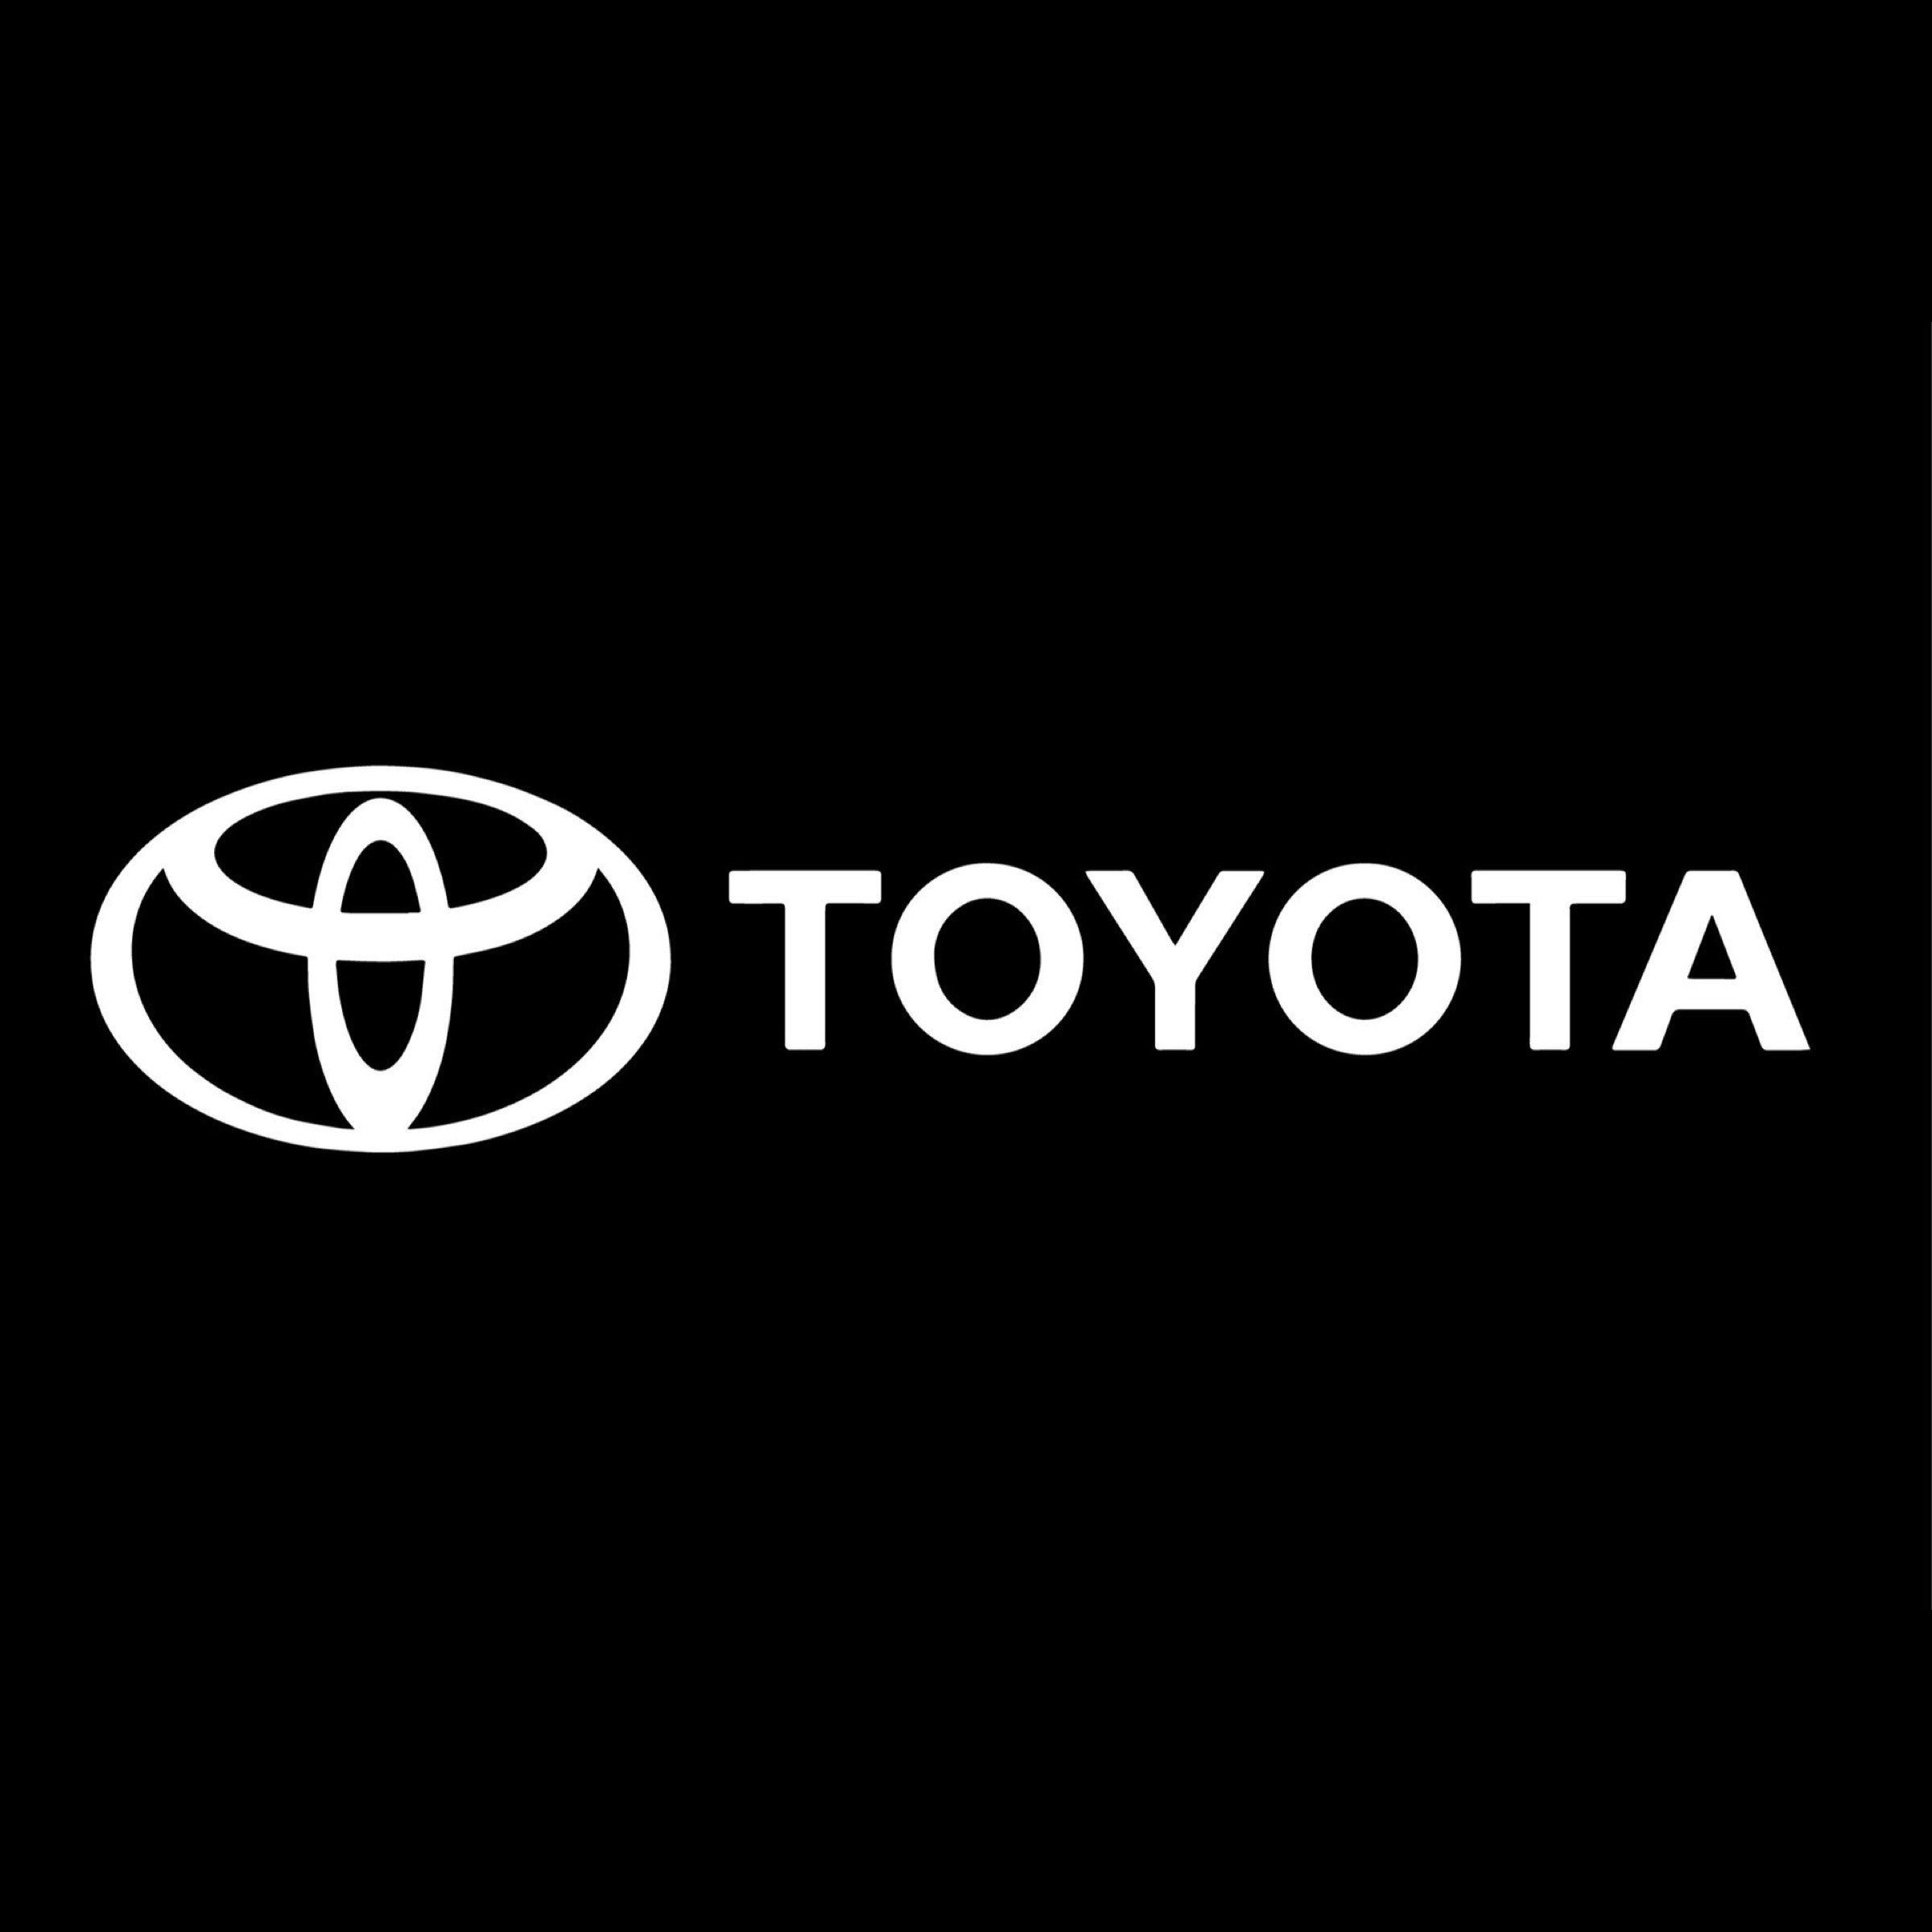 Toyota logo in white with black backdrop